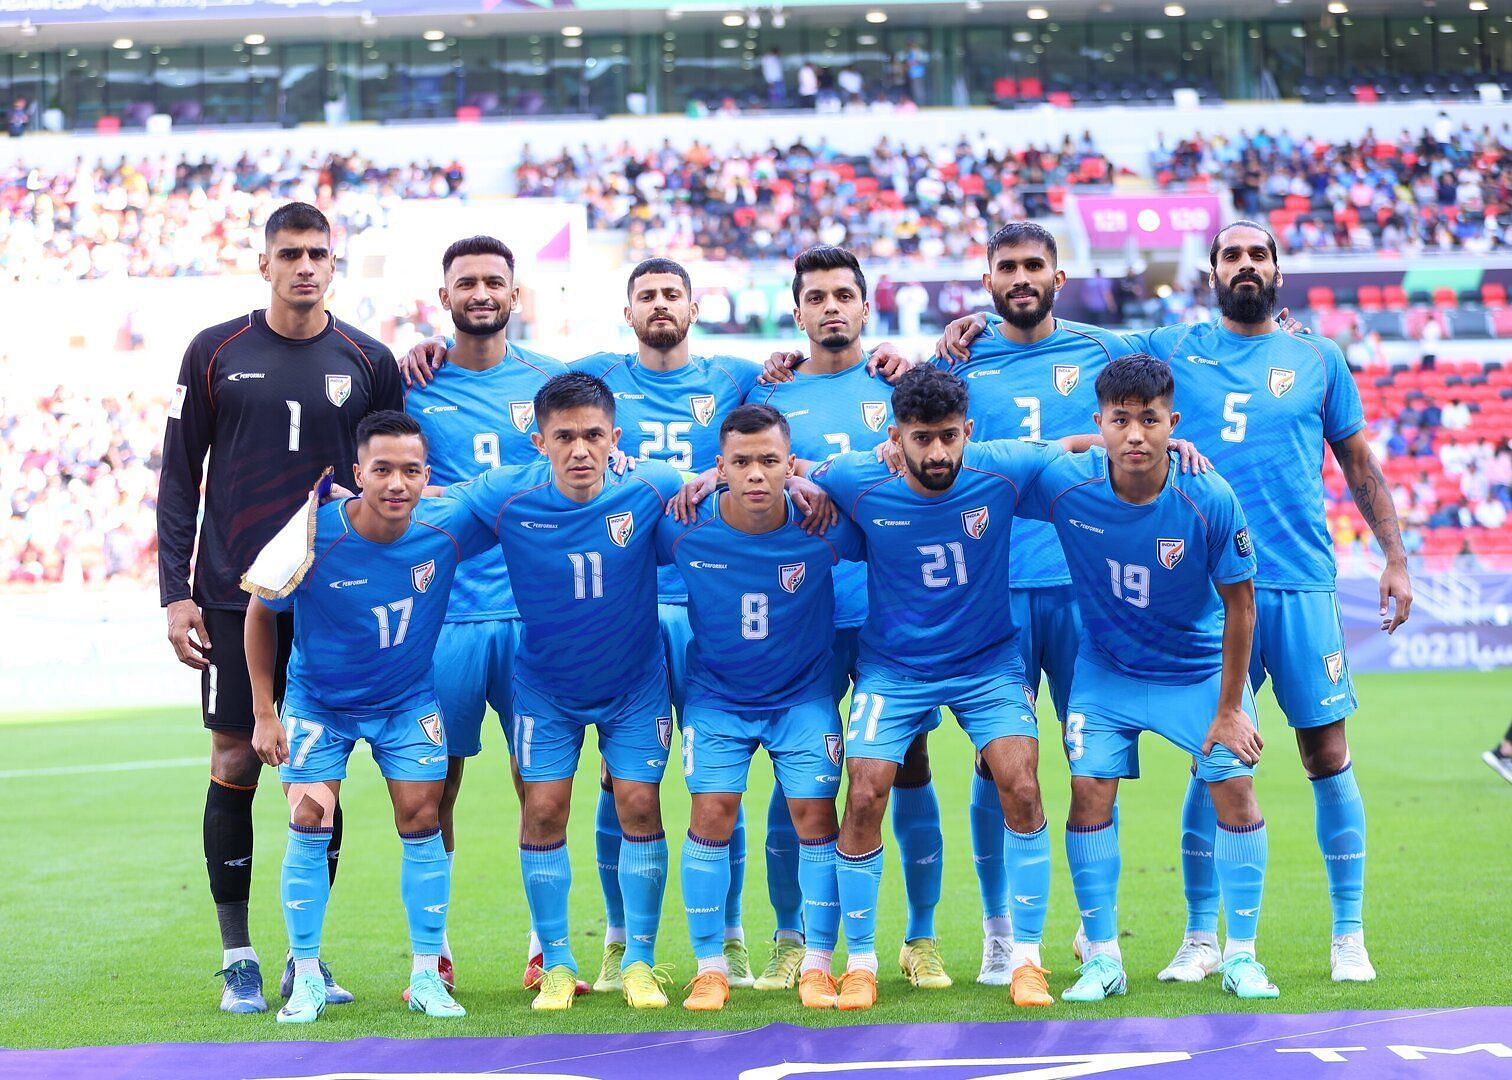 The All India Football Federation (AIFF) has announced a 25-member Indian Men